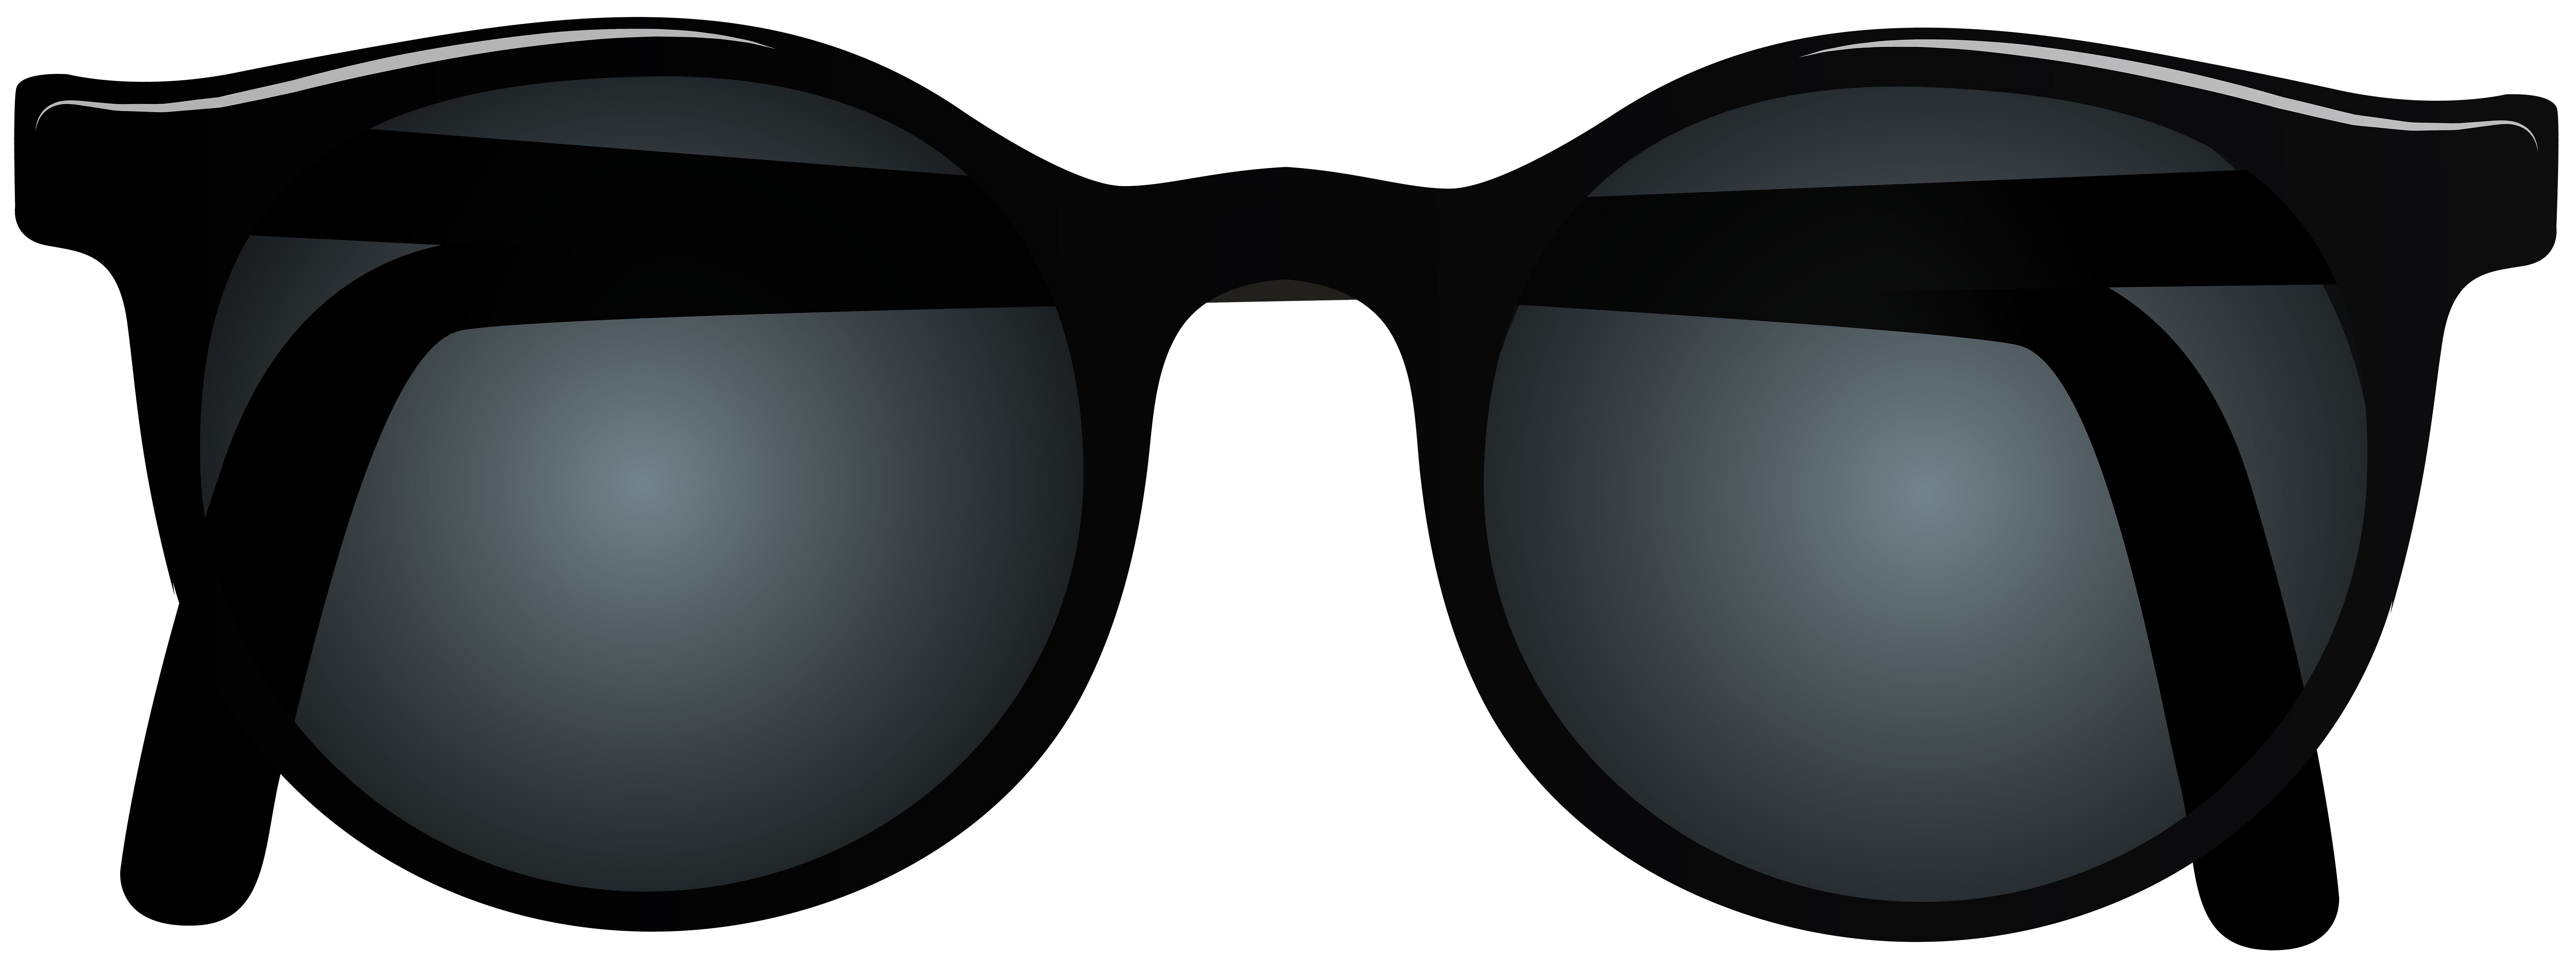 Download Black Sunglasses PNG Clipart Image | Gallery Yopriceville ...